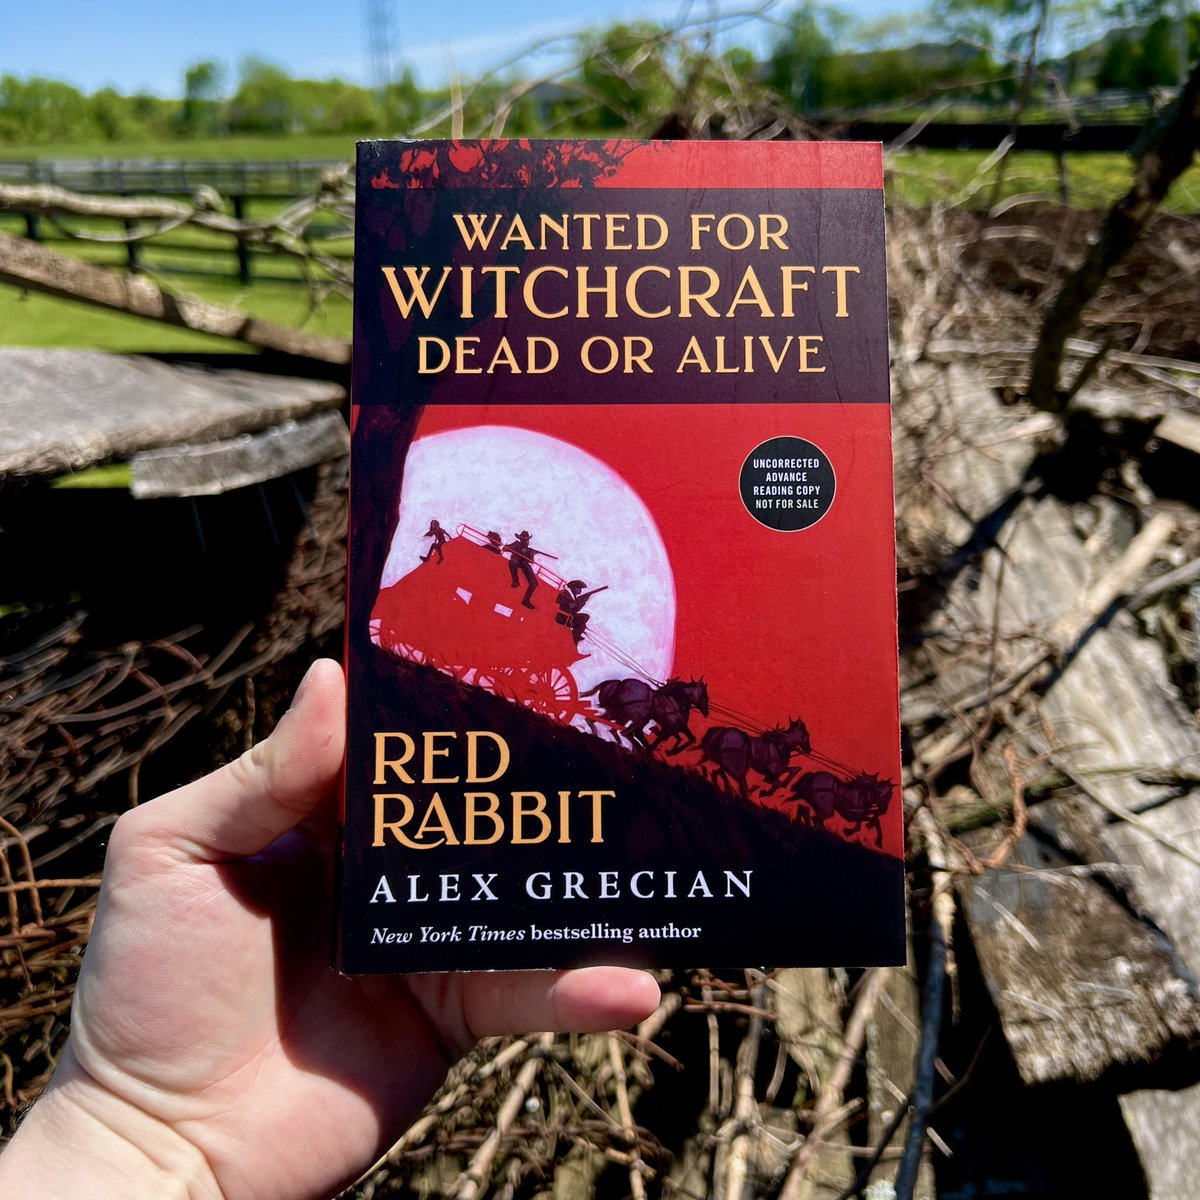 Yeehaw!! I came back from some outdoor chores to find this treat from Alex Grecian & Tor Nightfire. Folk horror in the 19th century American West? Hunting witches? Sign me up! RED RABBIT arrives this fall & I can already tell it’ll be a perfect read for those sere September days.